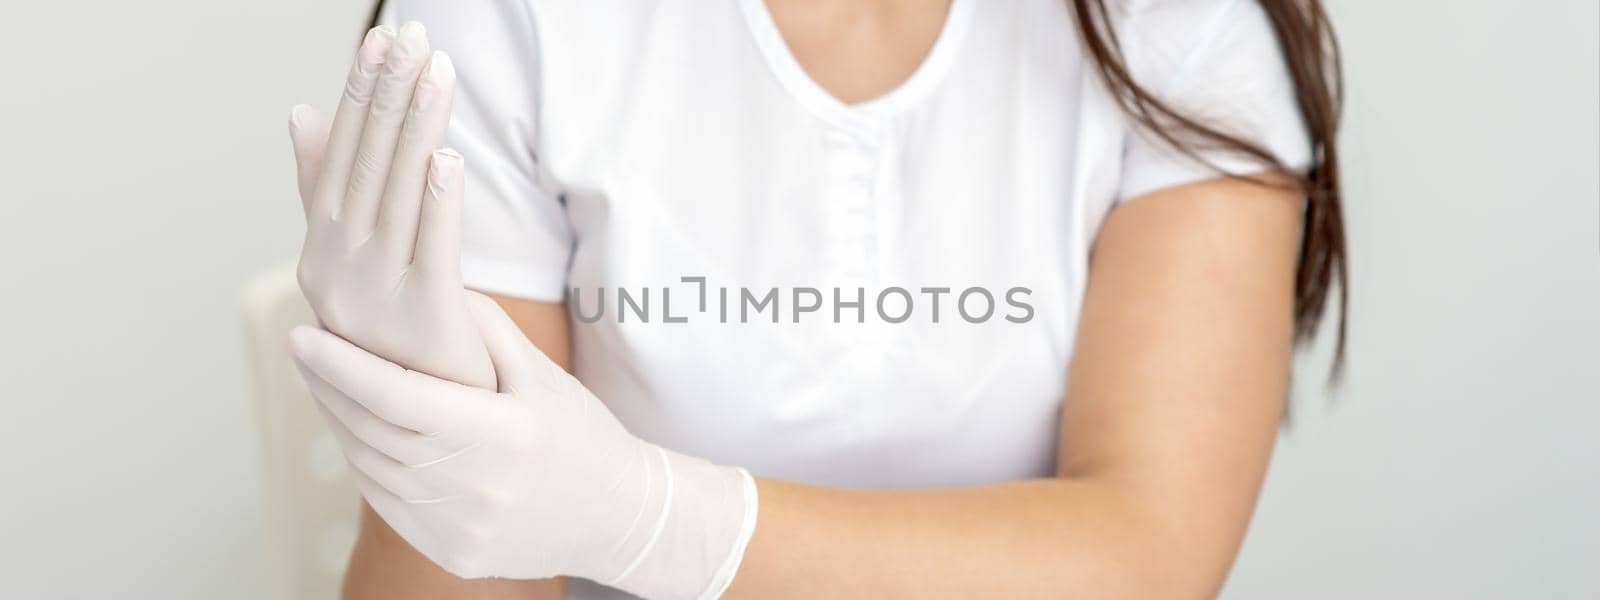 Female hands putting on protective white latex medical gloves during epidemic in quarantine